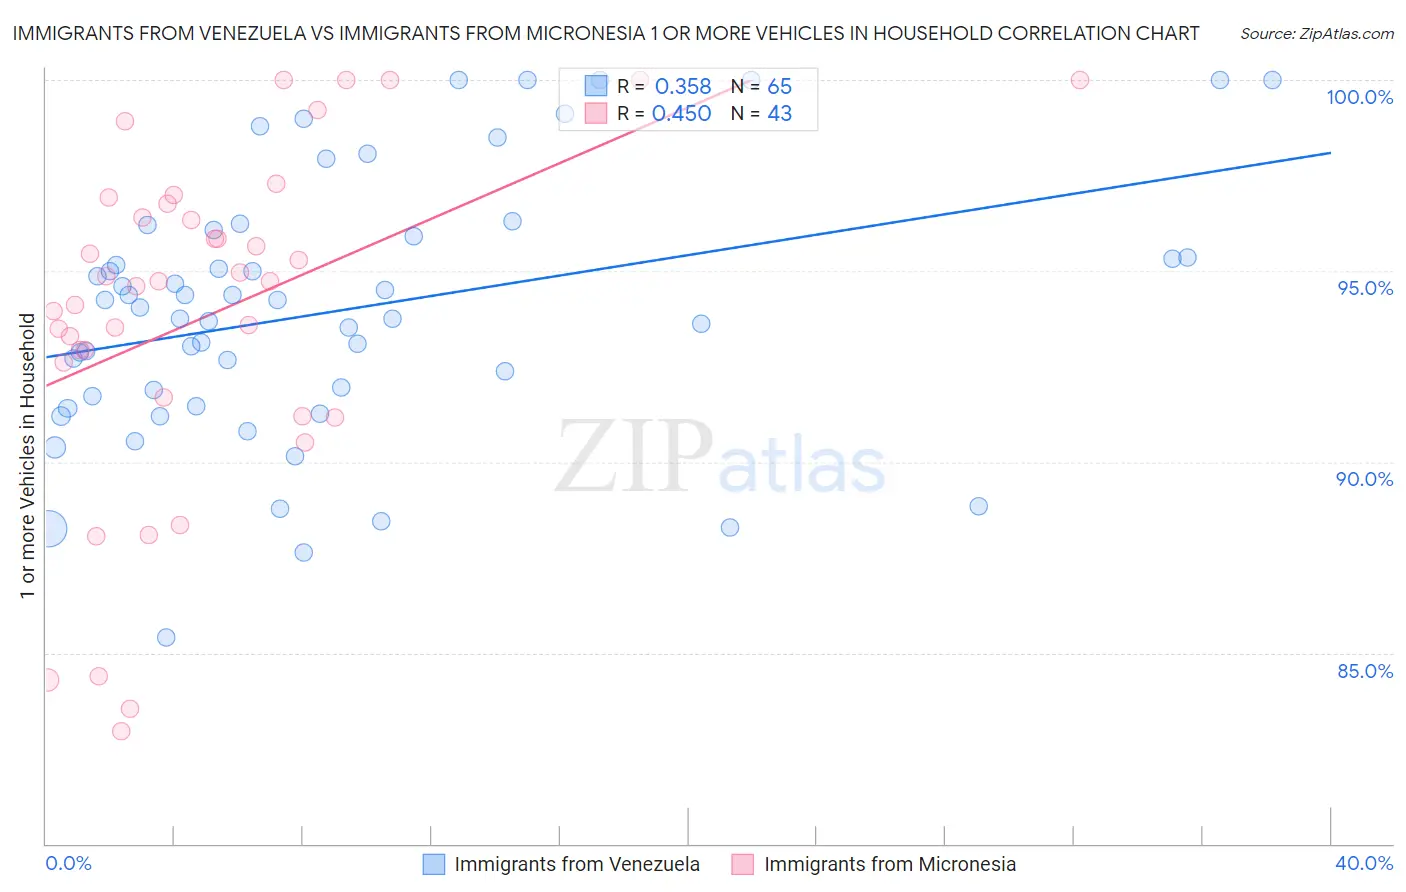 Immigrants from Venezuela vs Immigrants from Micronesia 1 or more Vehicles in Household